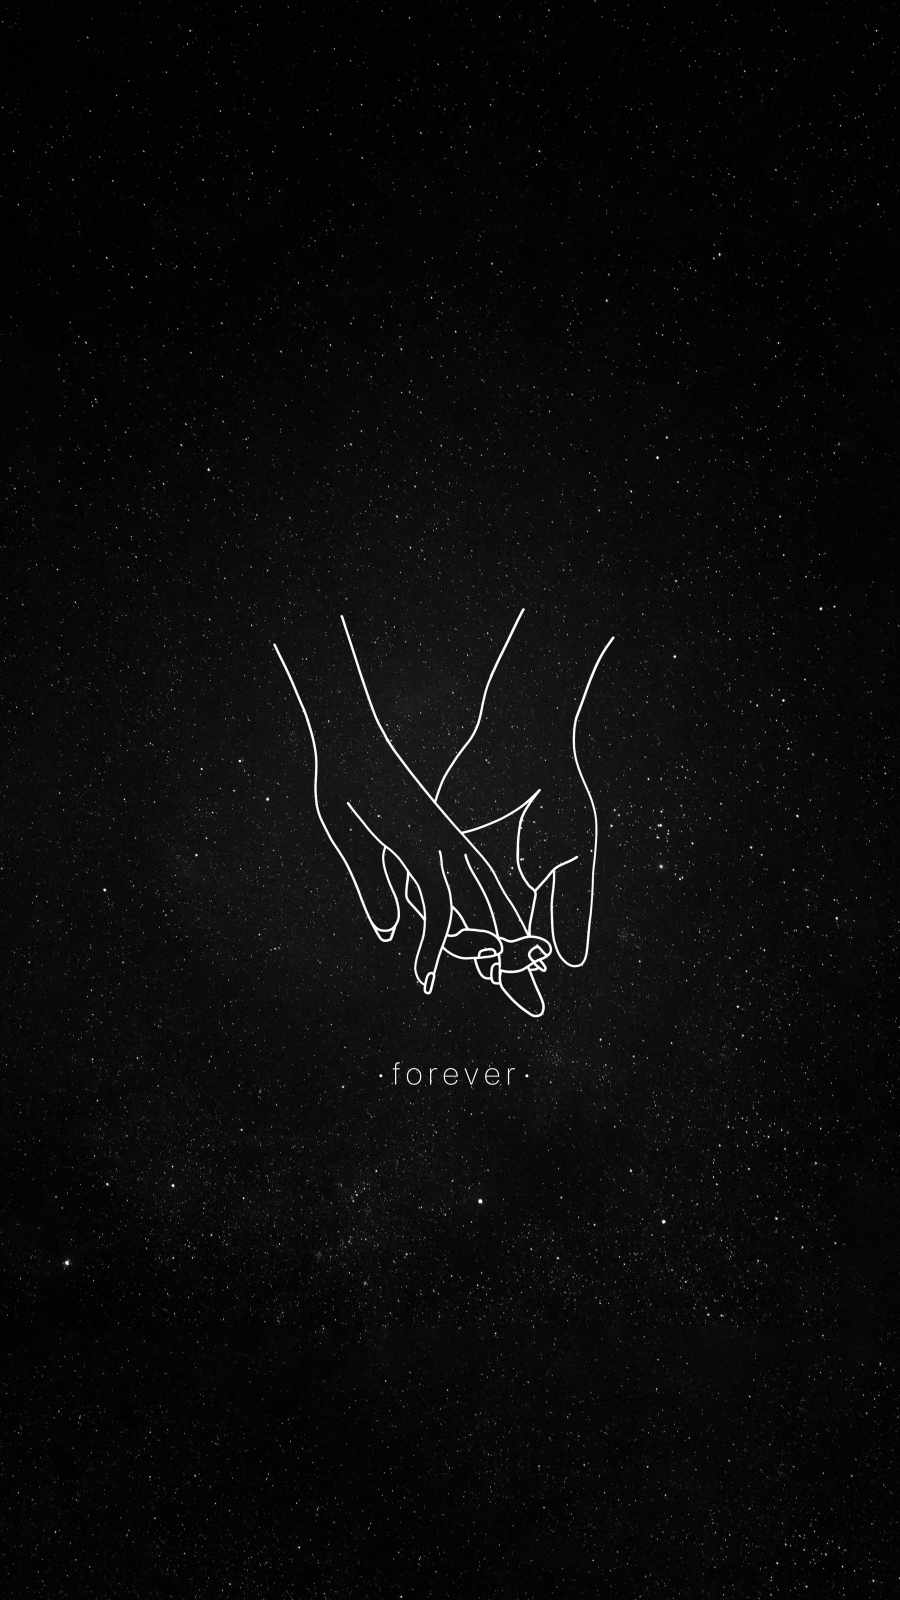 Forever Love IPhone Wallpaper - IPhone Wallpapers : iPhone Wallpapers